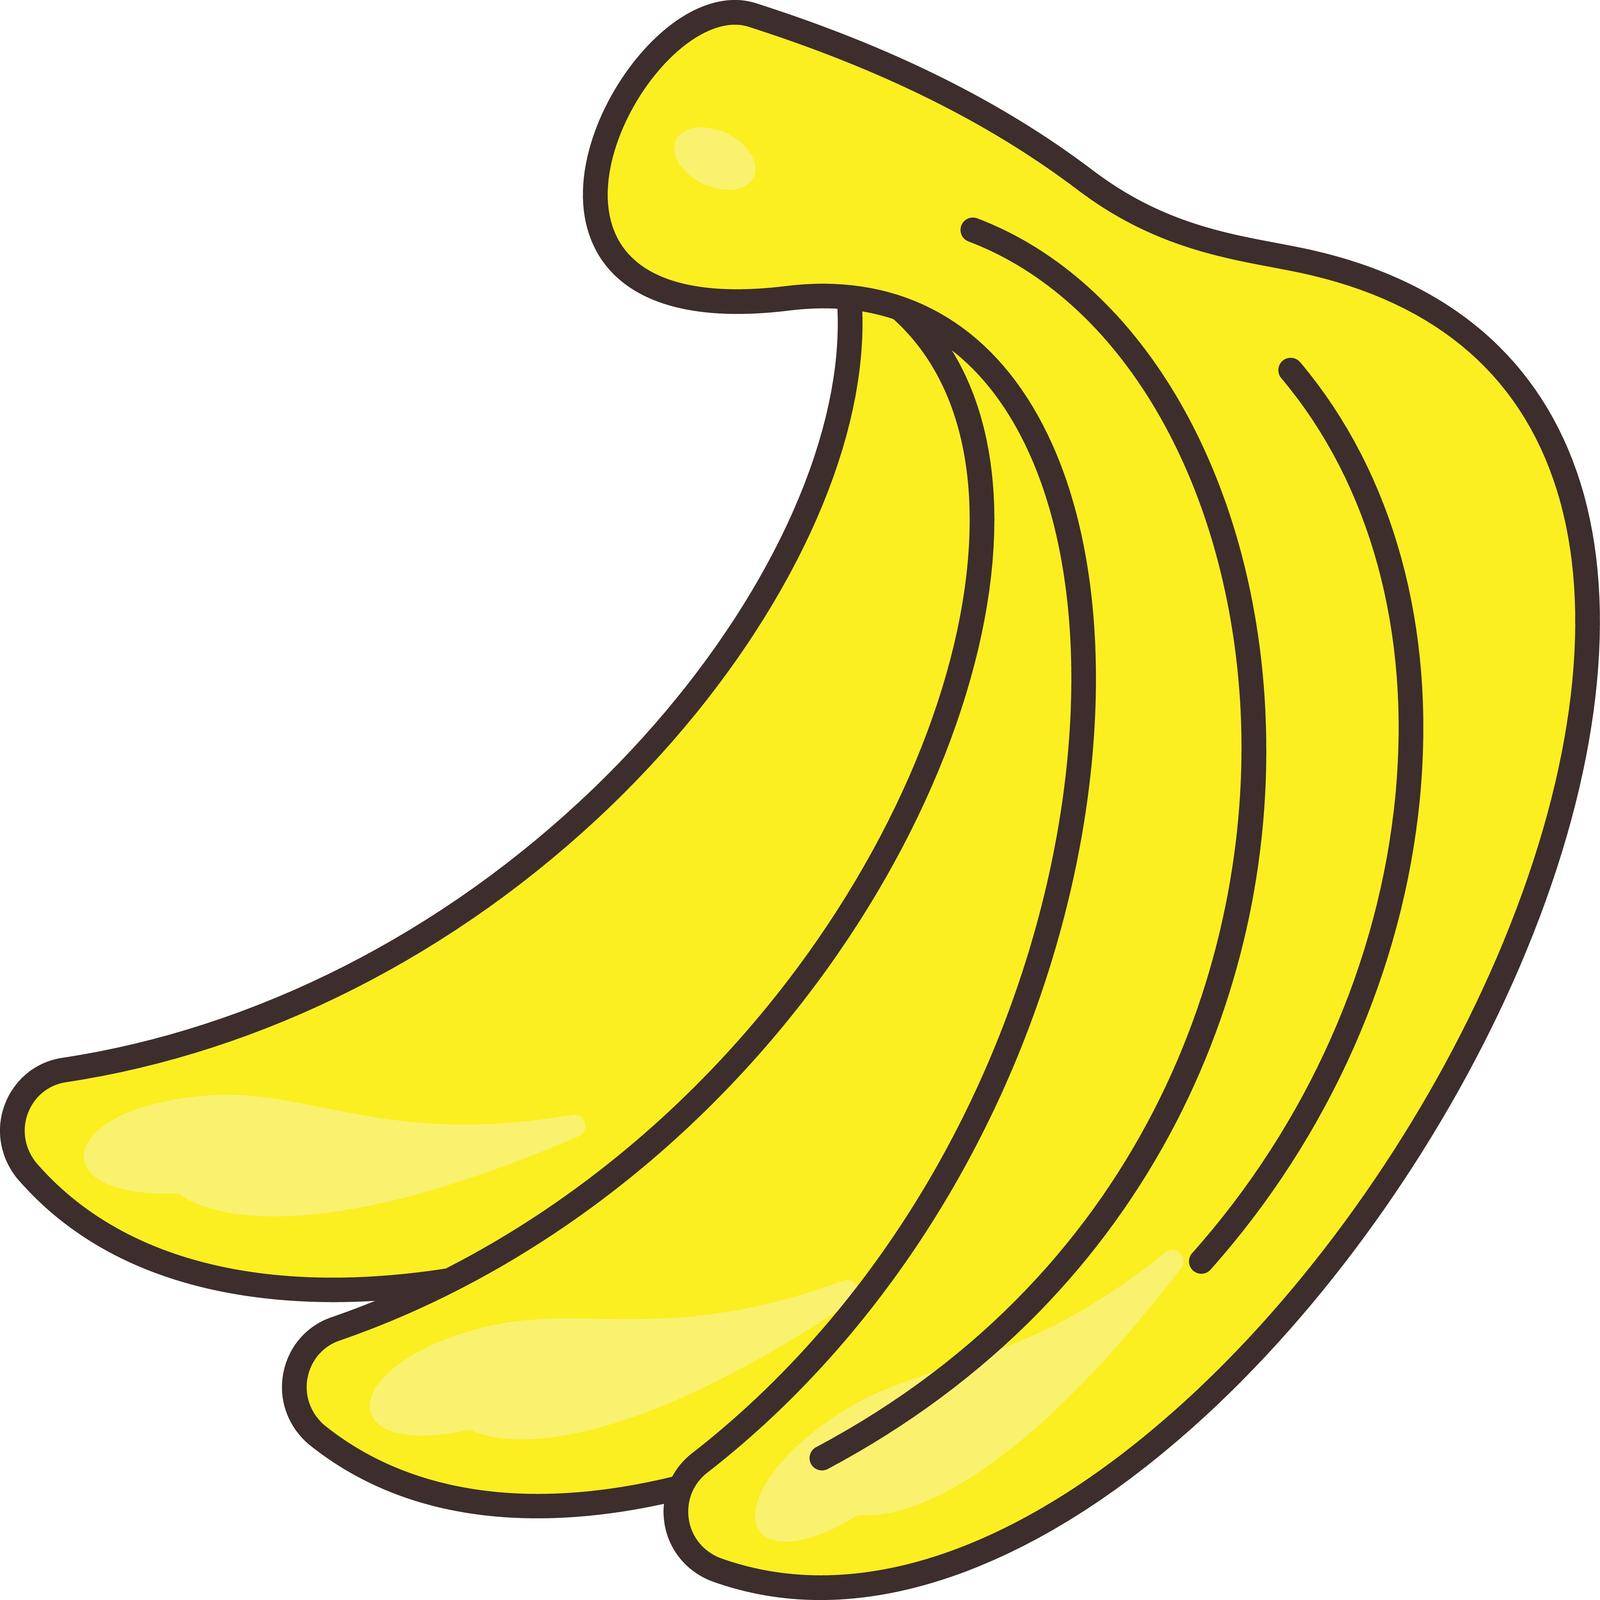 banana Vector illustration on a transparent background.Premium quality symmbols.Vector line flat icon for concept and graphic design.